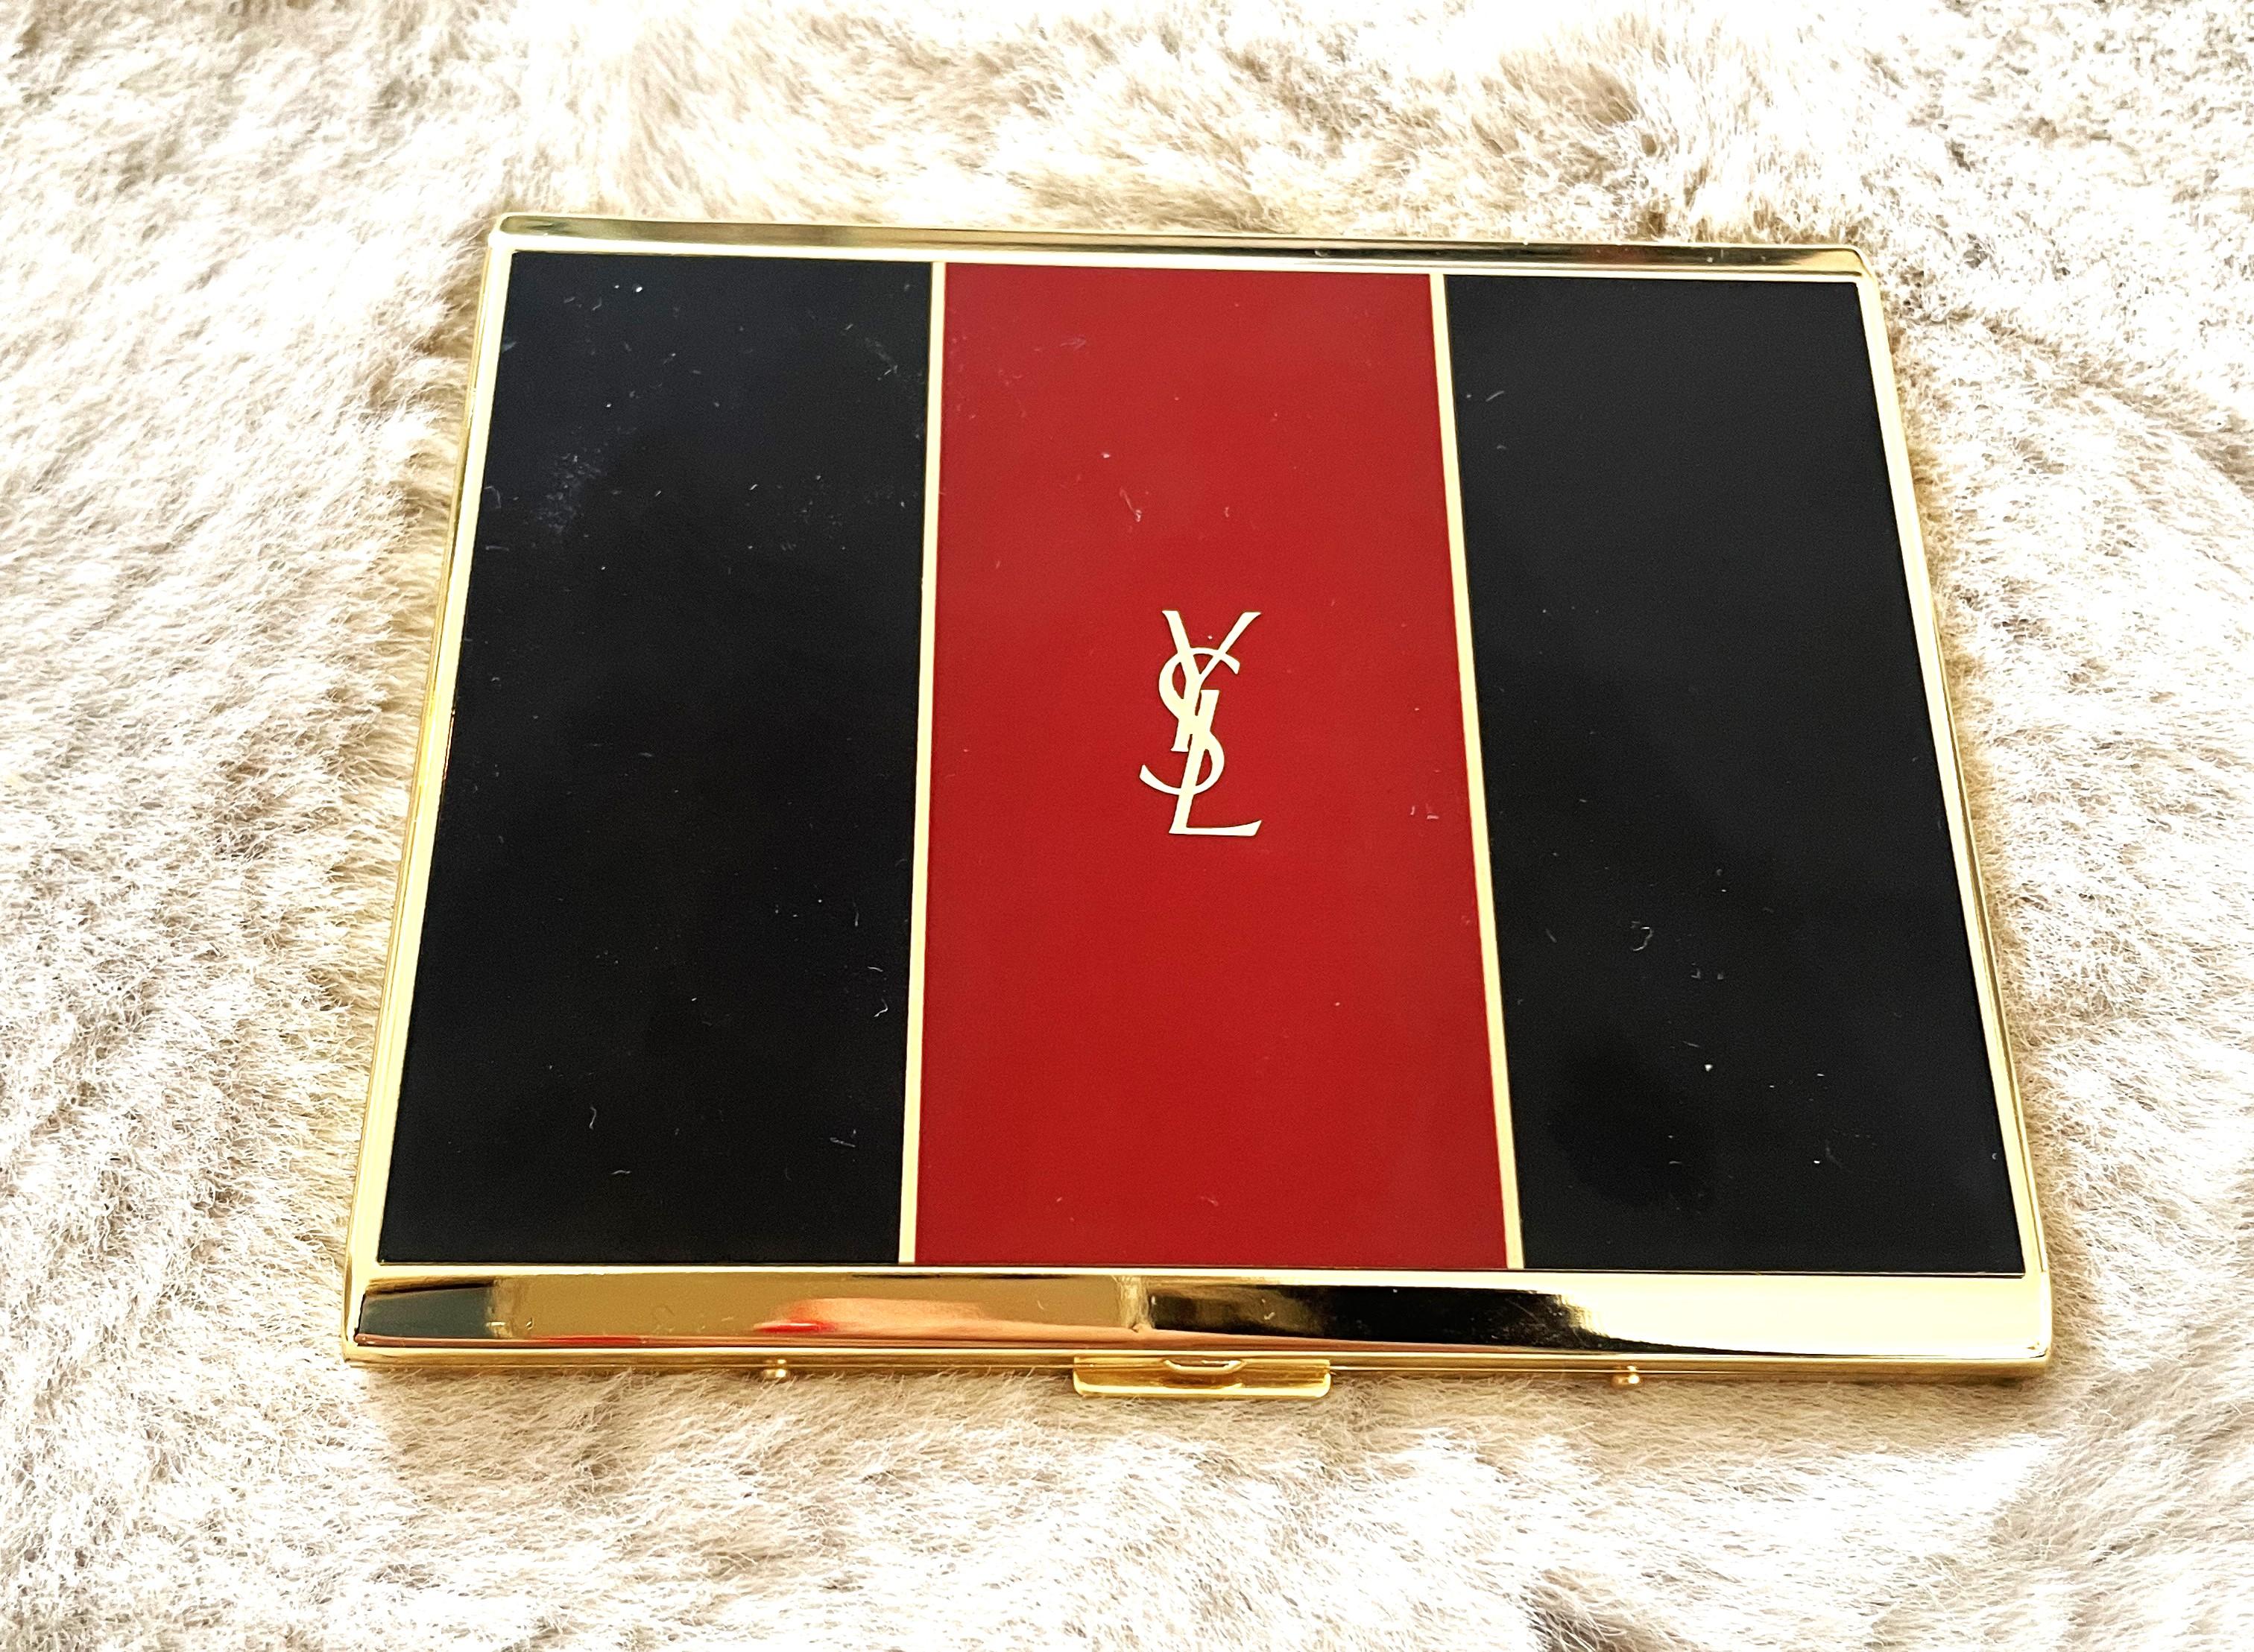 Rare 80s unused YSL Gold Plated Black Red Cigarette Case. With this chic and special cigarette holder you will steal the show
Very nice design and so chique. A perfect Christmas gift!

Designer cigarette cases are often considered luxury accessories